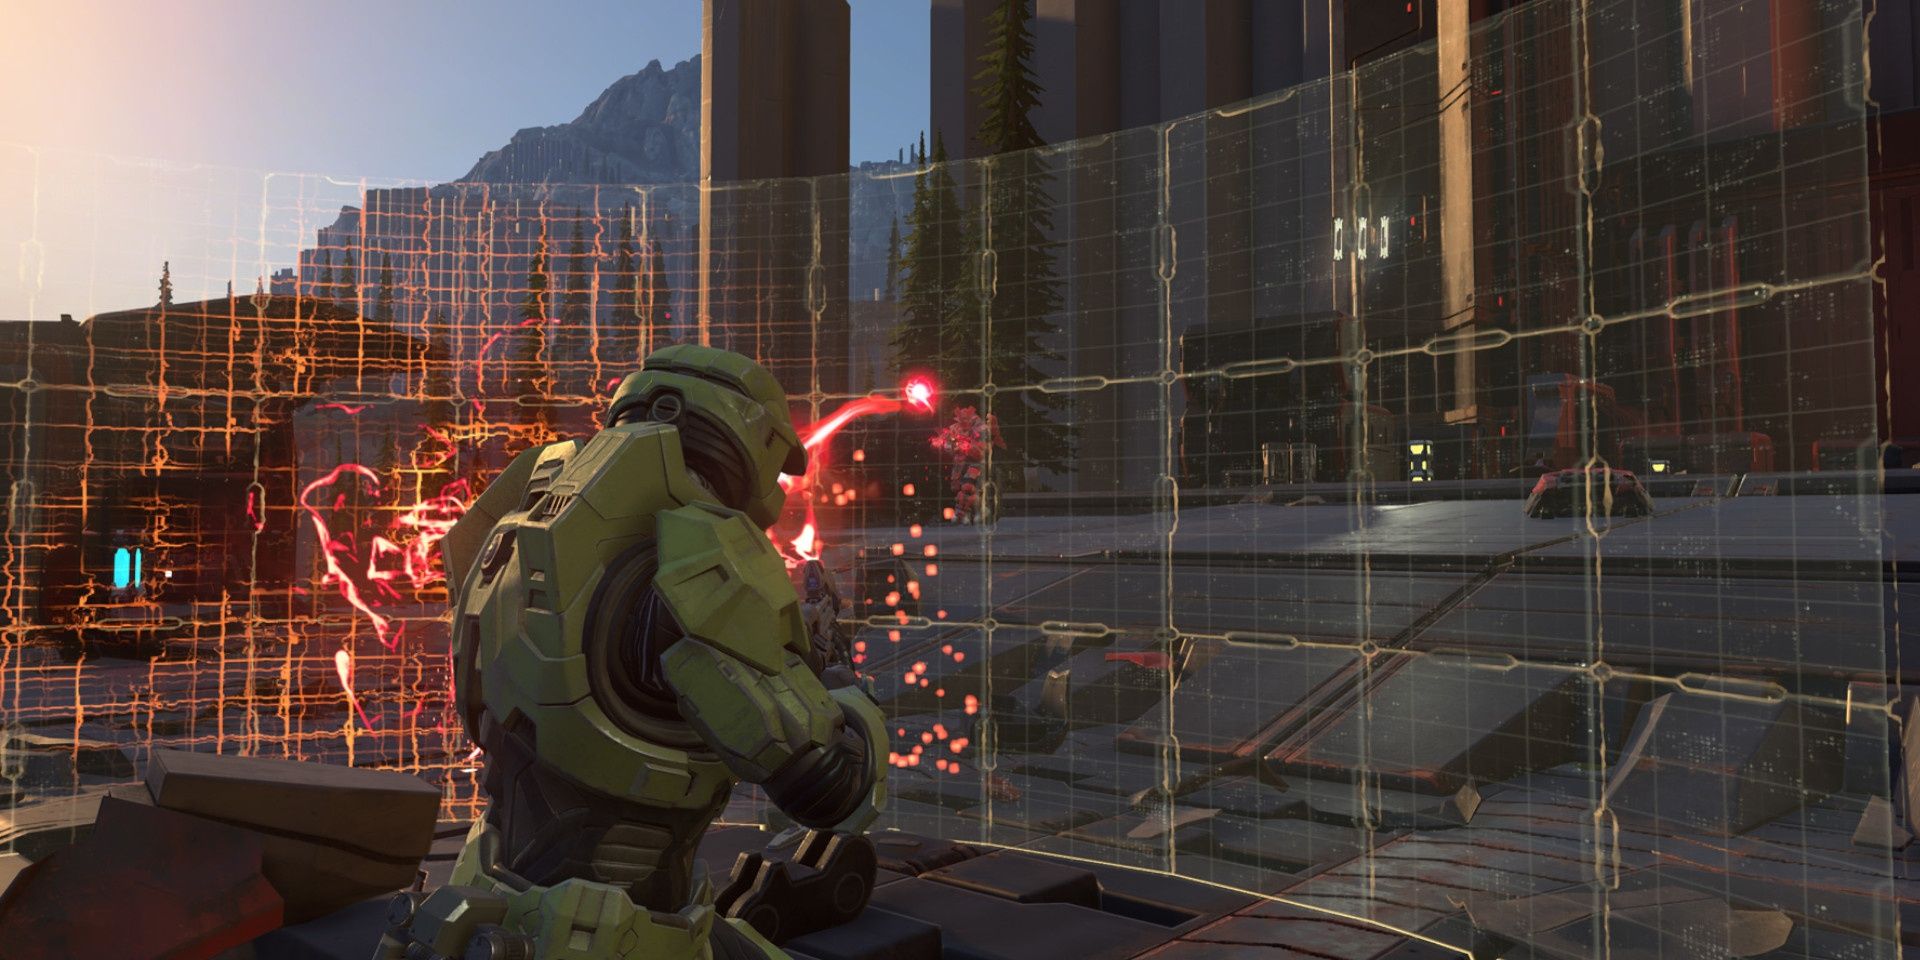 halo master cheif using a shield to stop enemies 